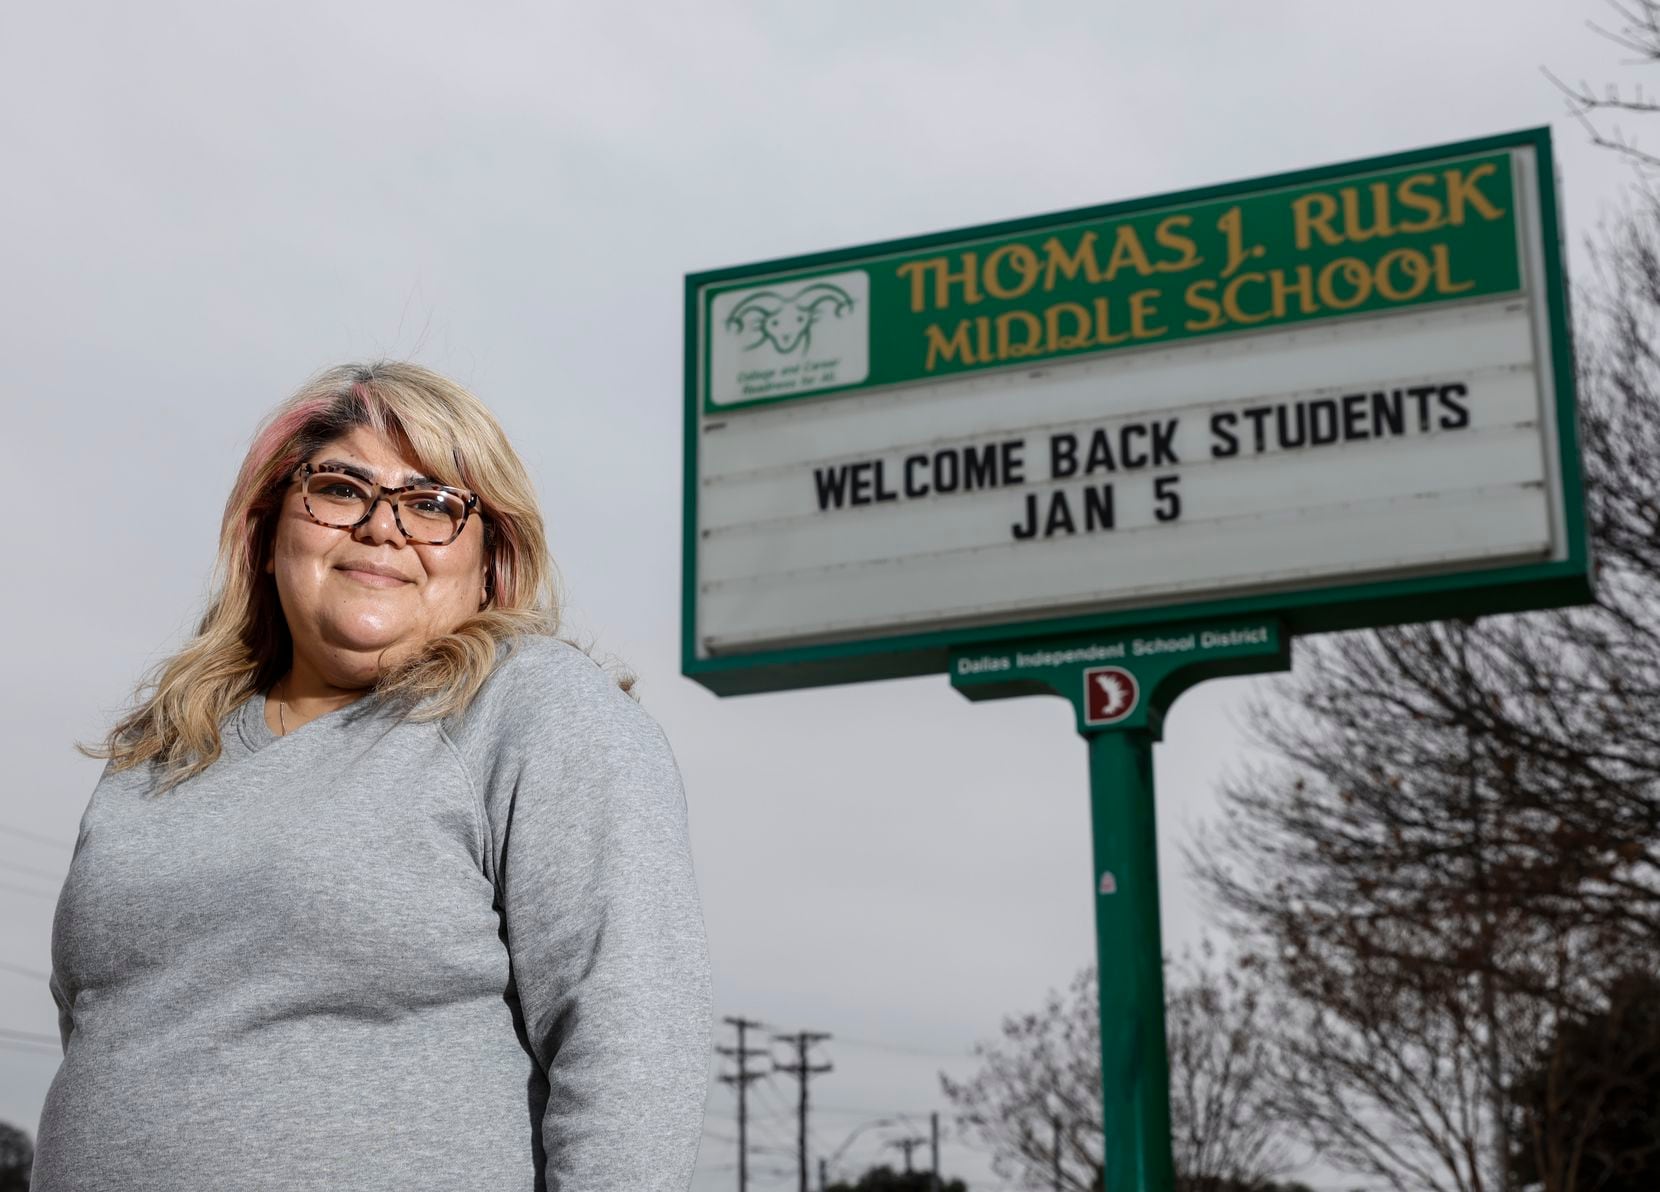 Sandra Roman, a parent of an eighth grader at Thomas J. Rusk Middle School, stood in front of the school in Dallas on Jan. 7, 2022.